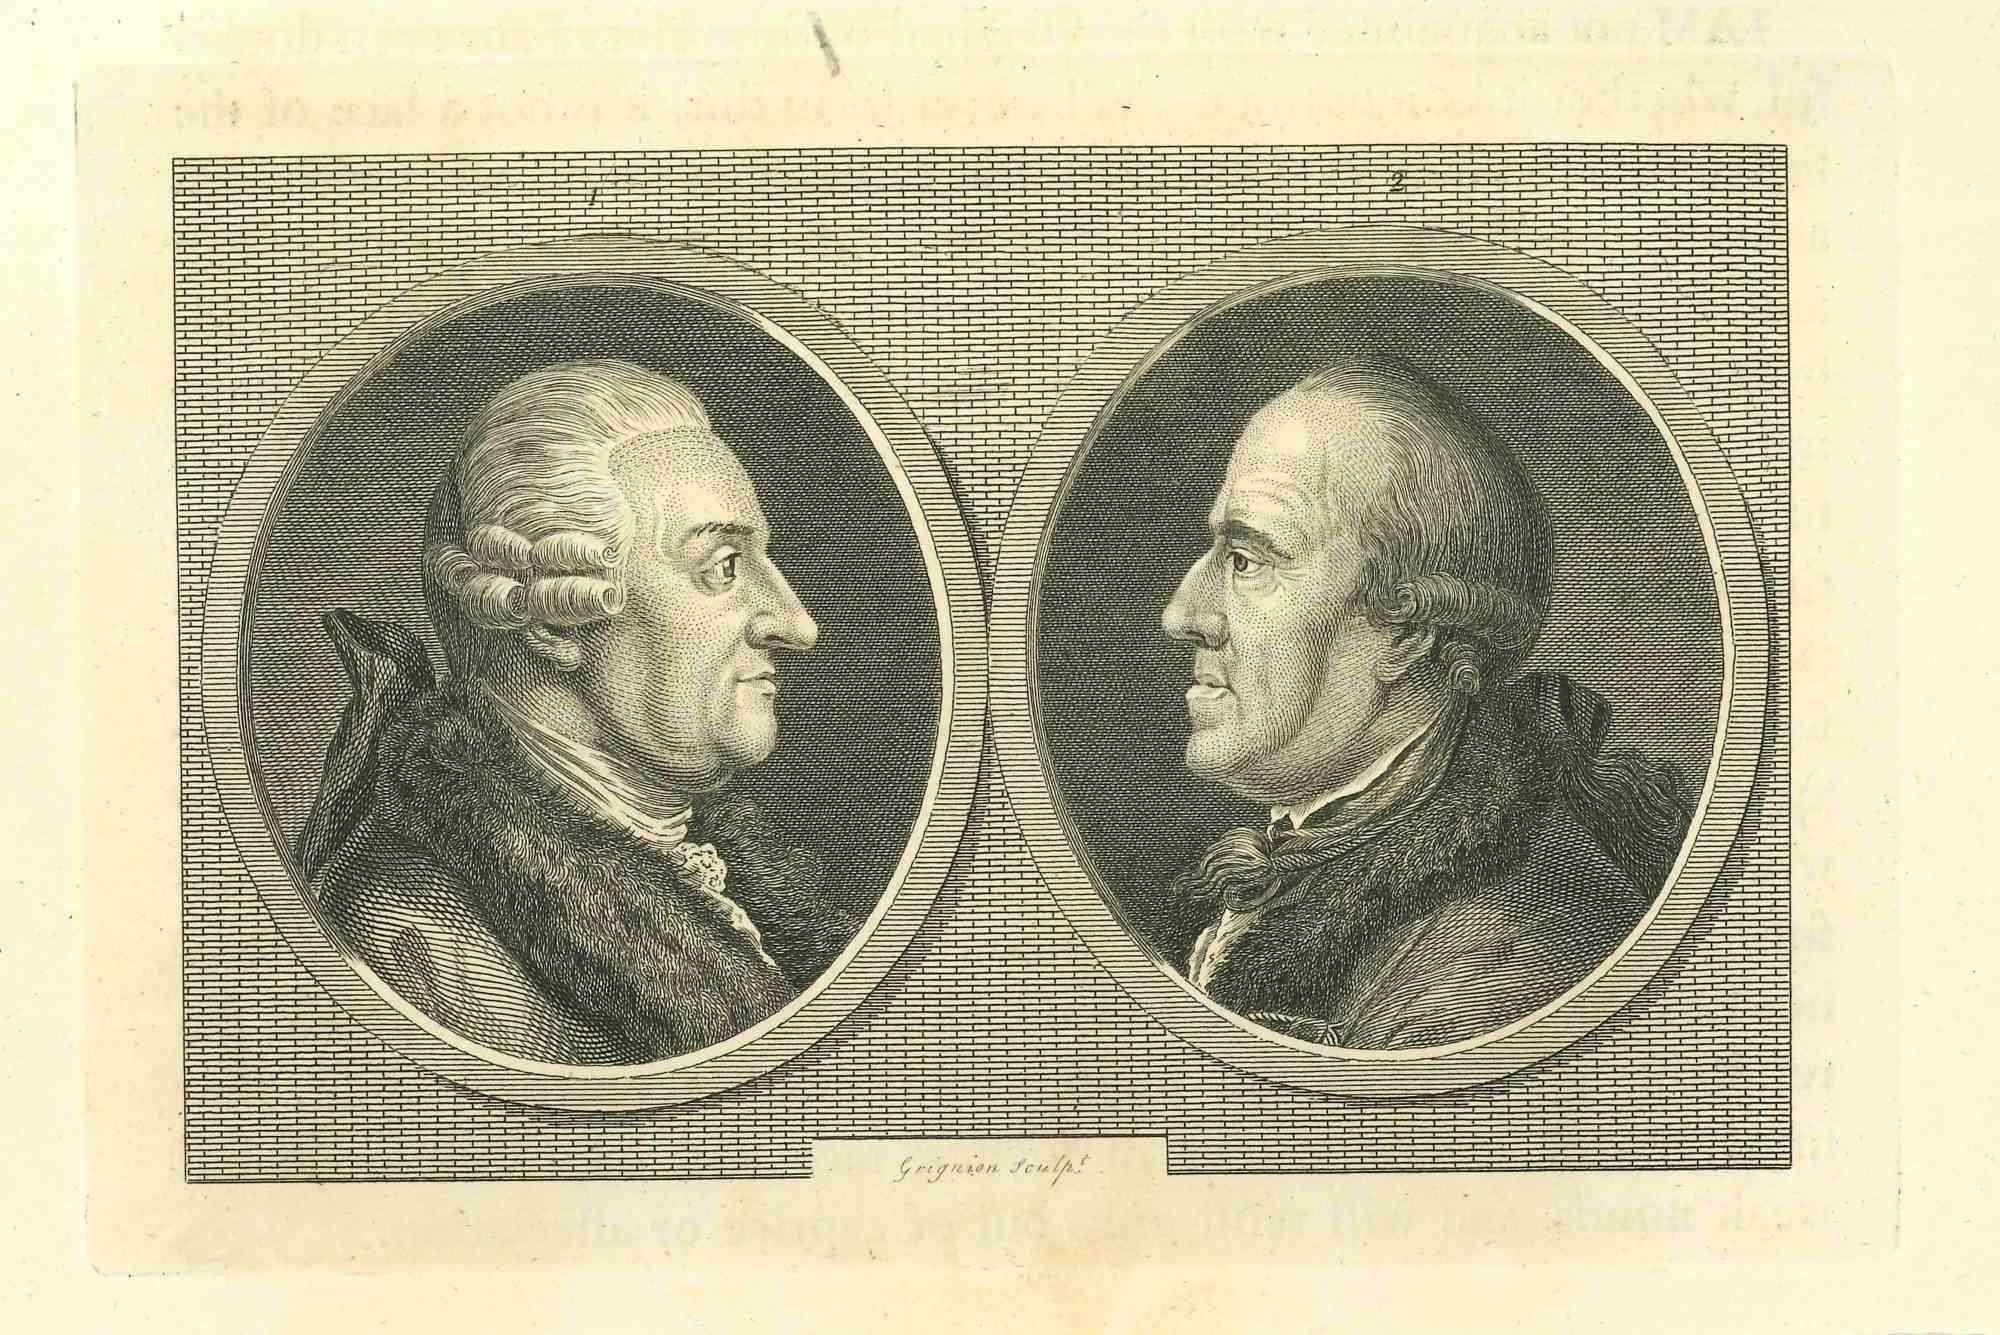 The physiognomy - Profile of Men is an original etching artwork realized by Thomas Holloway for Johann Caspar Lavater's "Essays on Physiognomy, Designed to Promote the Knowledge and the Love of Mankind", London, Bensley, 1810. 

With the script on